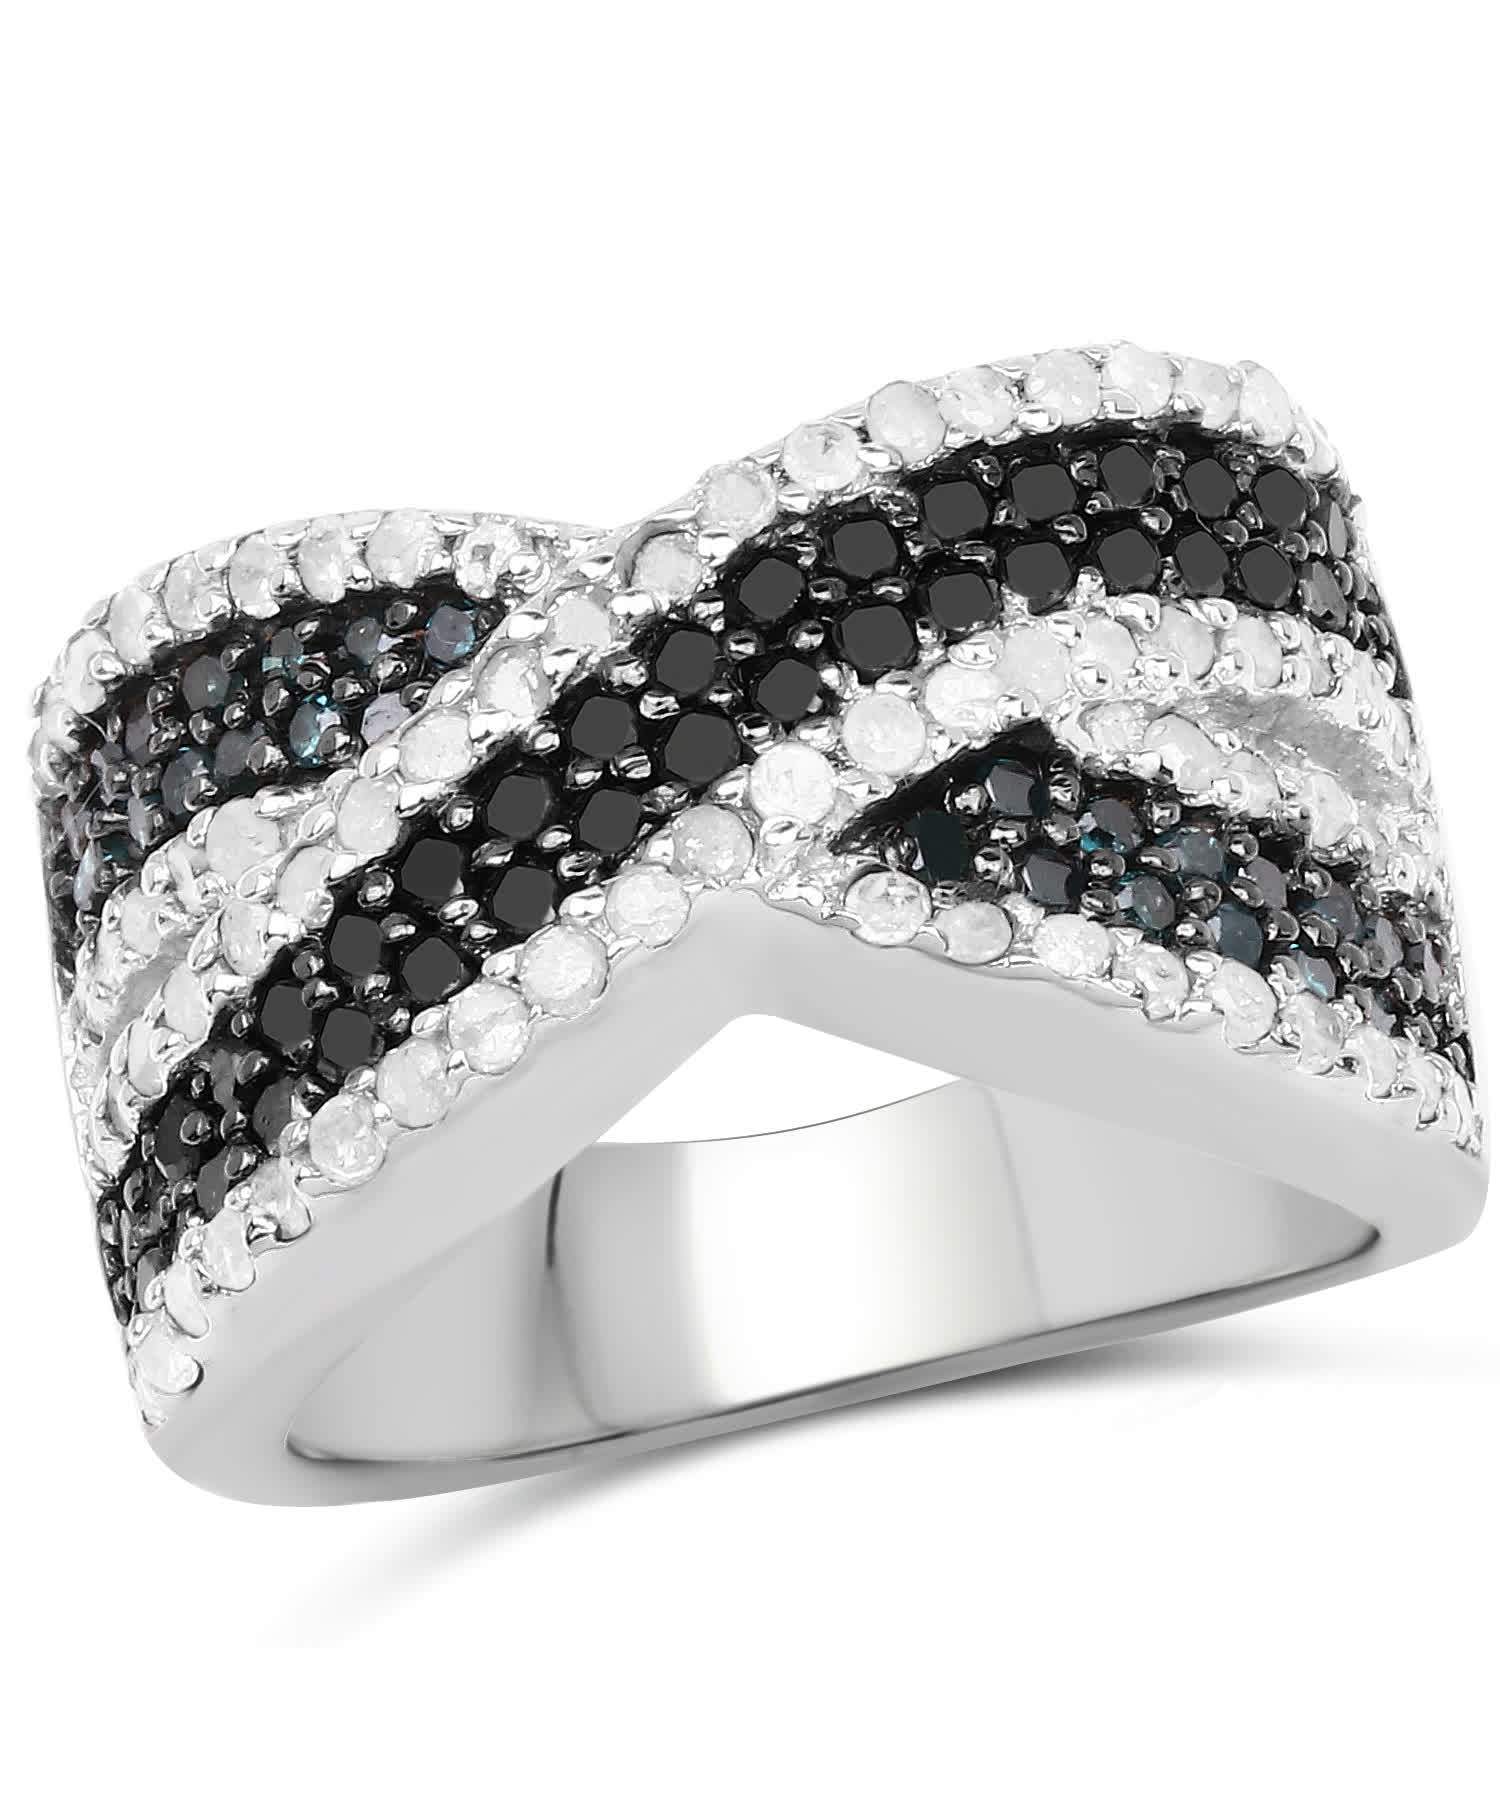 1.57ctw Fancy Blue, Black and Icy Diamonds Rhodium Plated 925 Sterling Silver Ring View 1